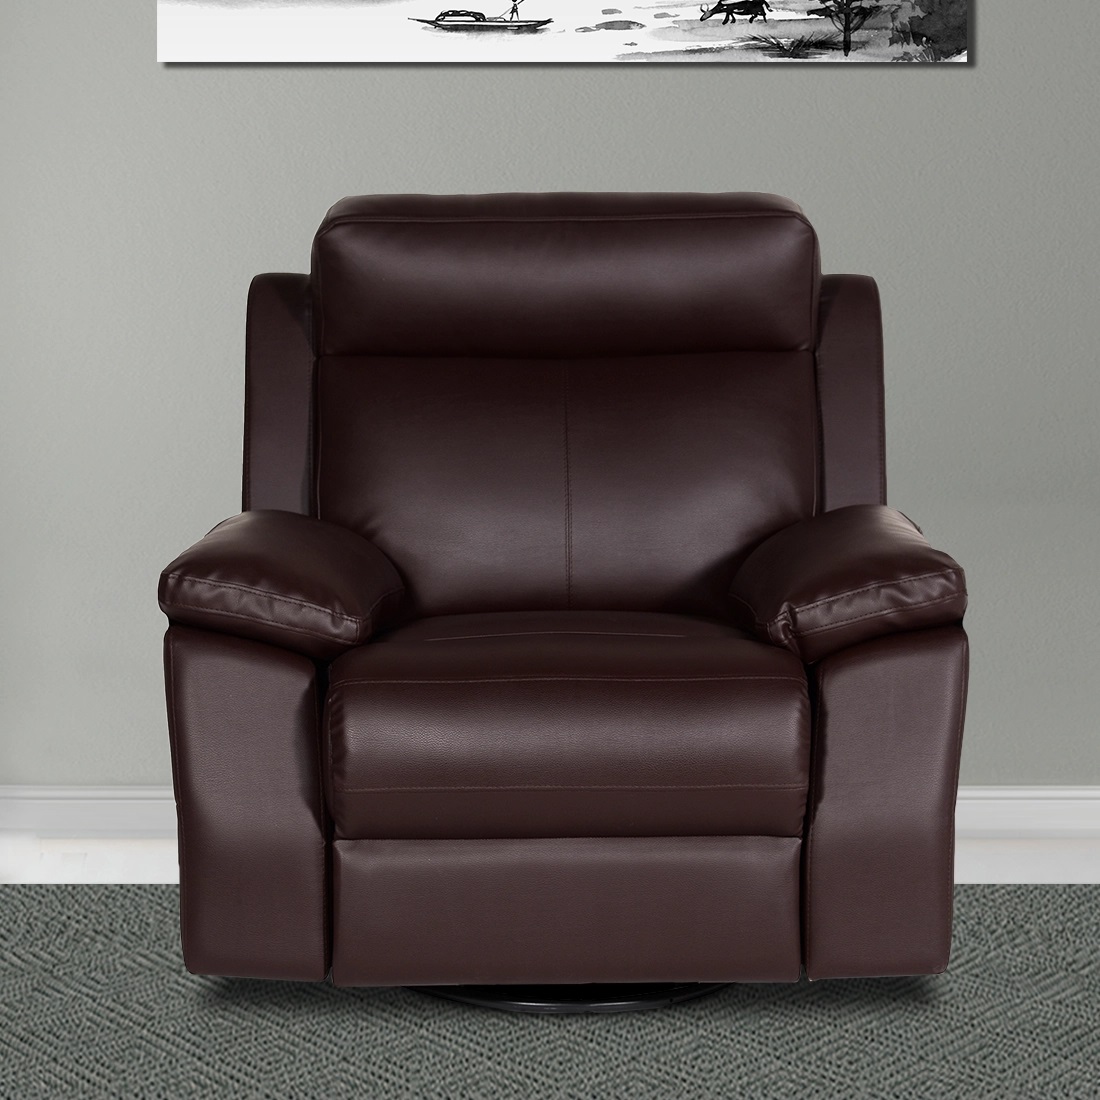 Get up to 50% off on Recliners Chairs and Sofas in DelhiHome and LifestyleHome - Office FurnitureSouth DelhiBadarpur